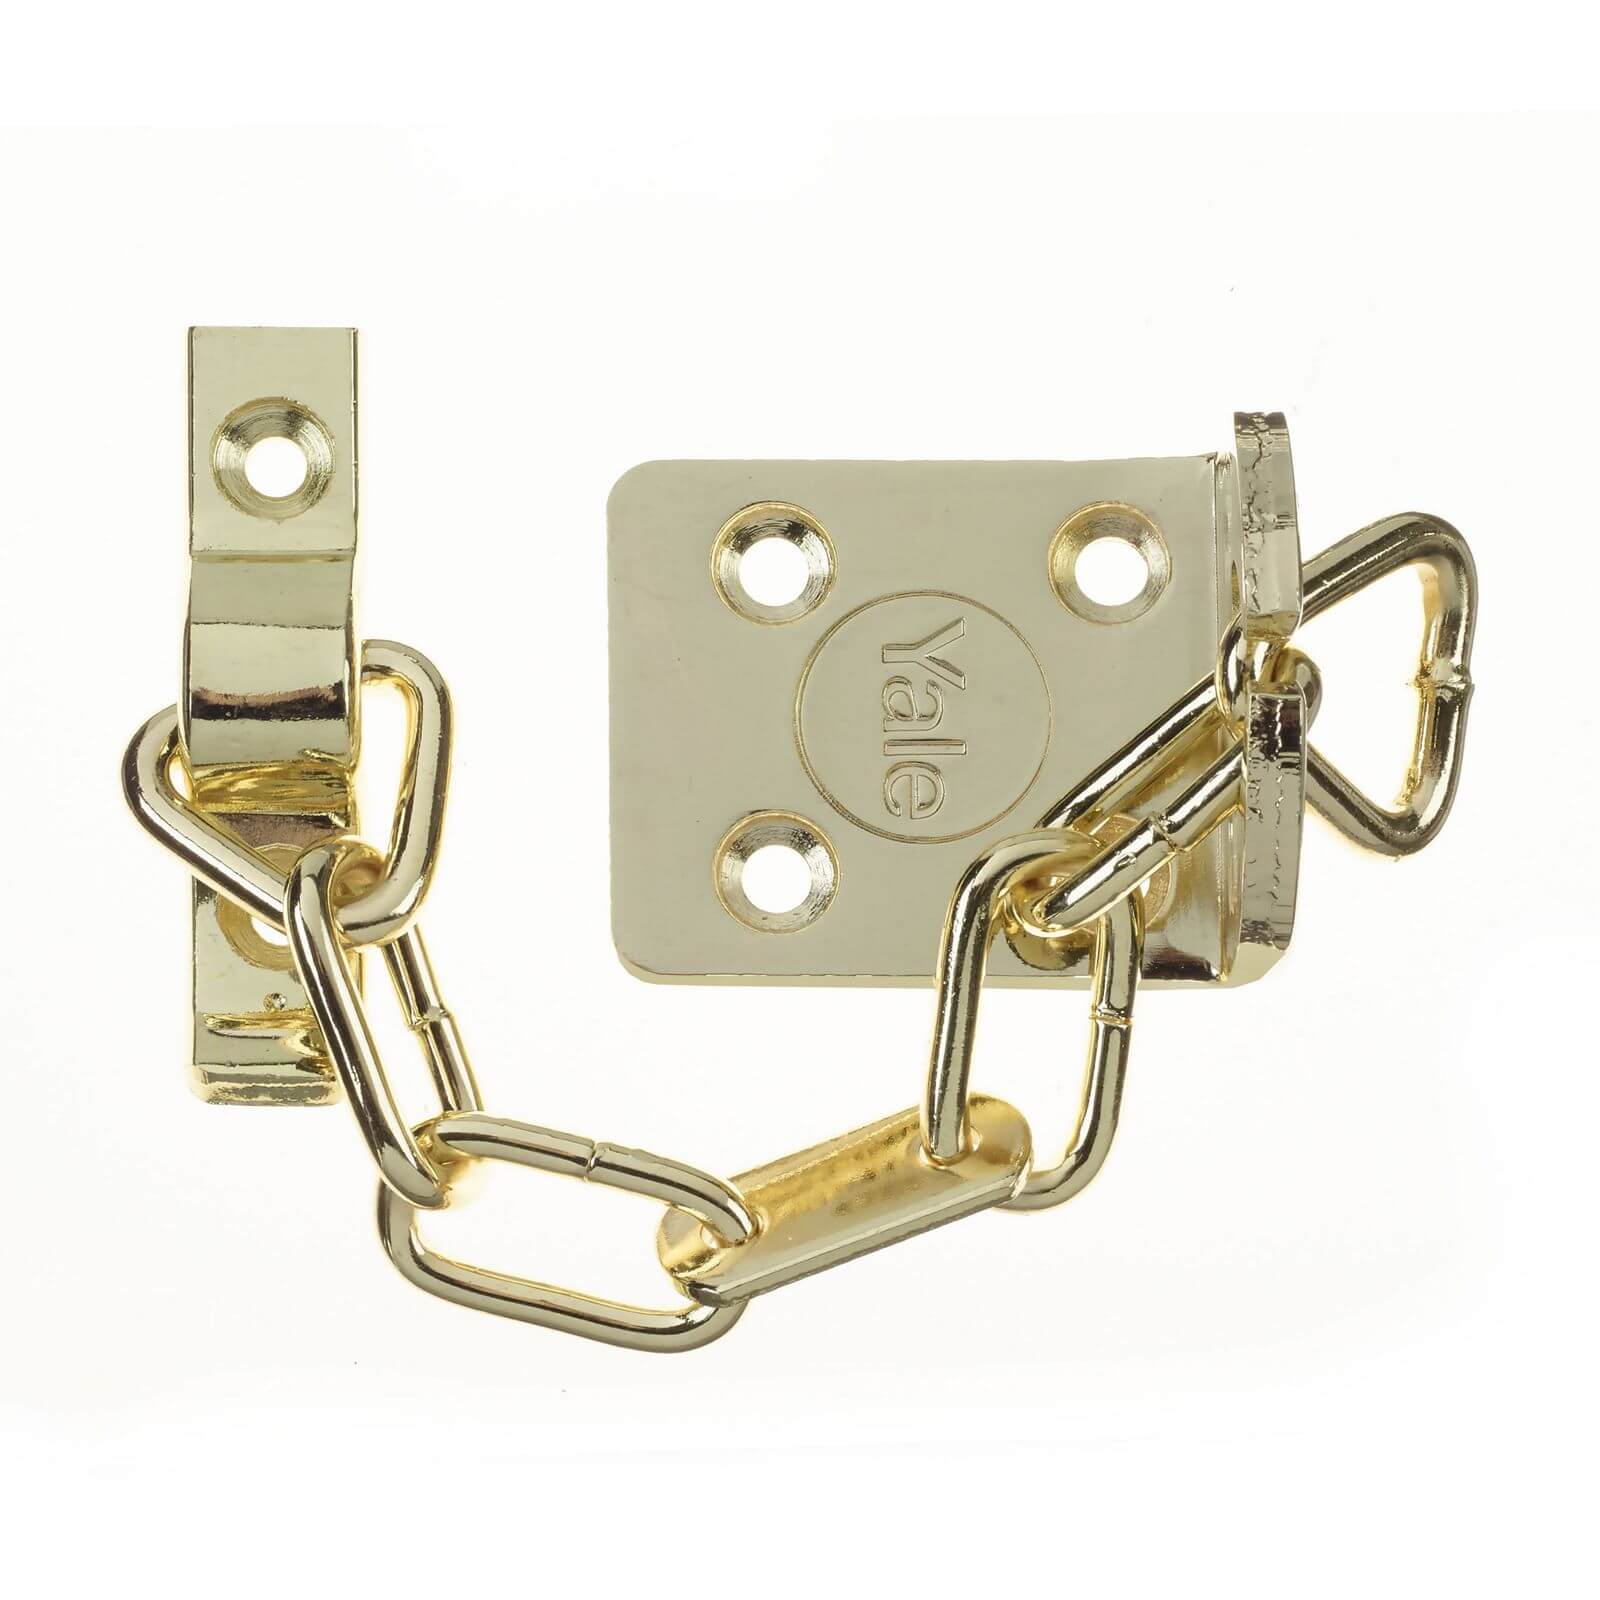 Photo of Yale Ws6 Ts003 Rated Security Door Chain - Polished Brass